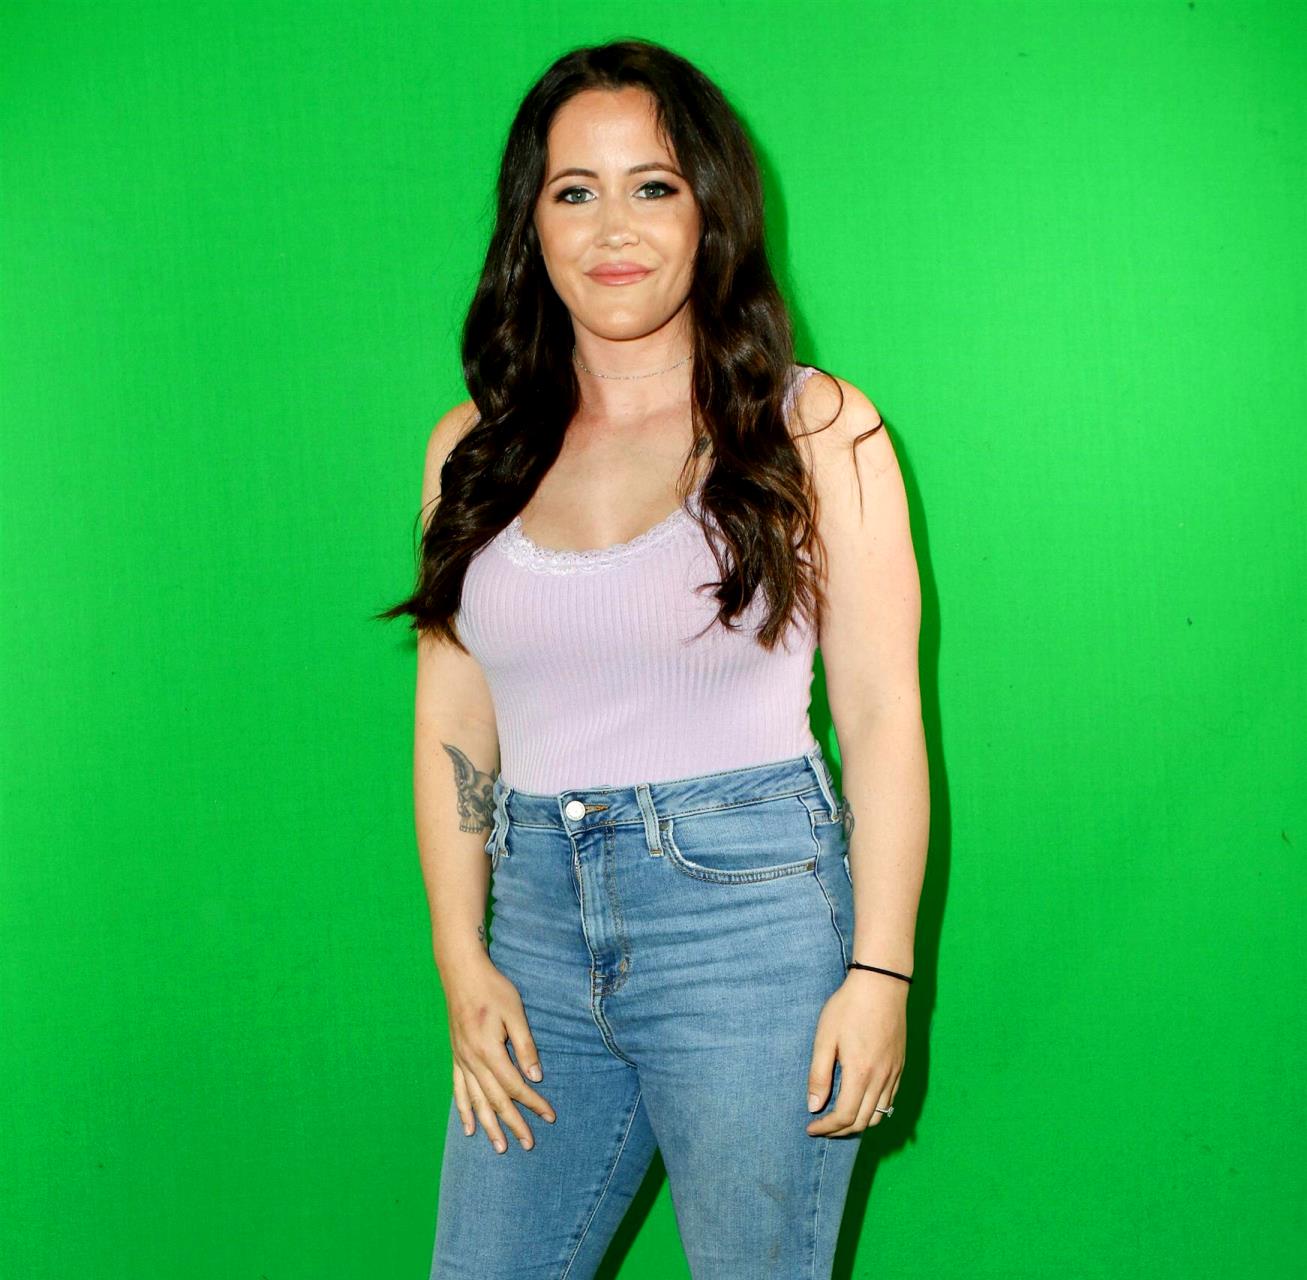 Jenelle Evans Walks Off Teen Mom 2 Reunion When Confronted Over Racist Posts, Slams Producers